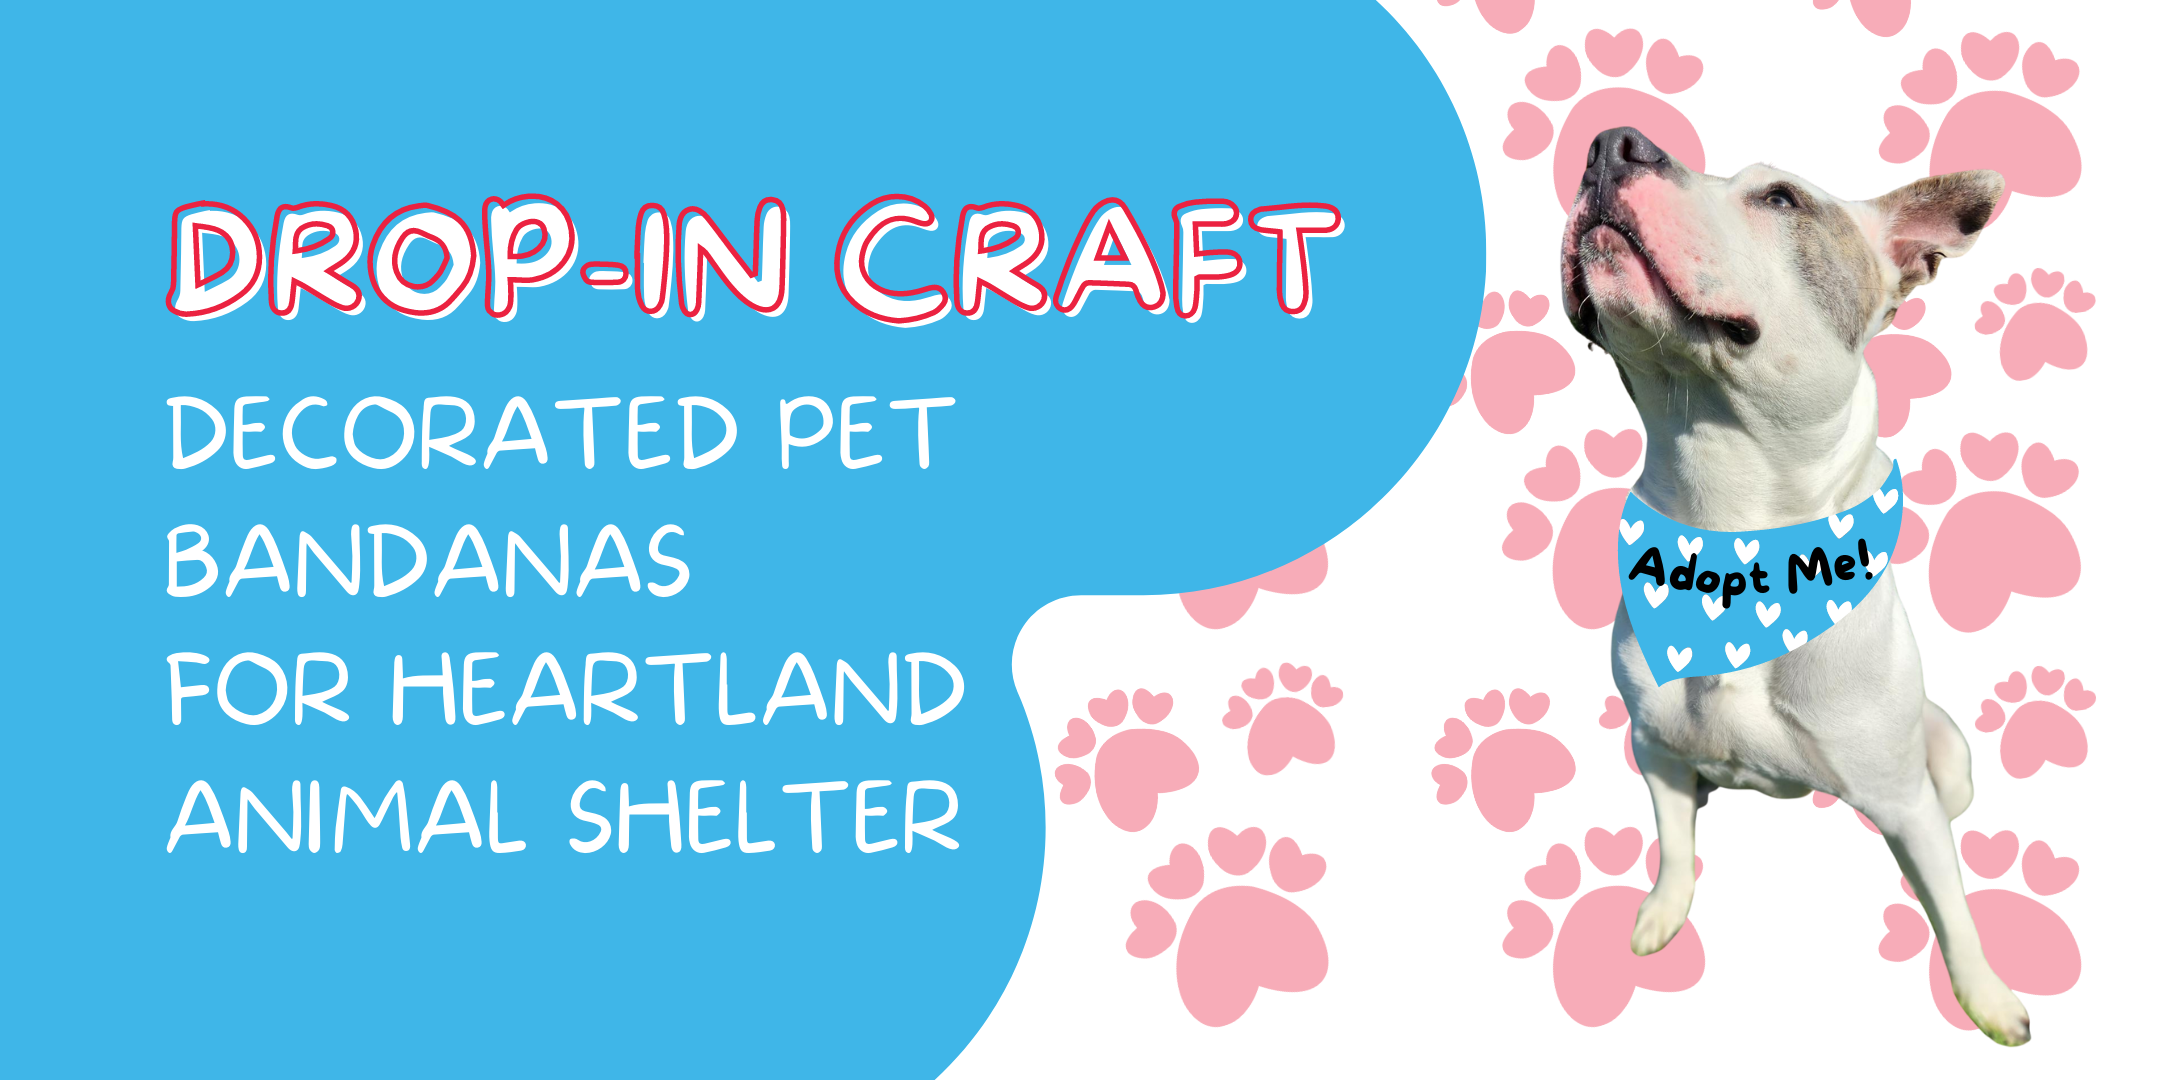 image of "Drop-in Craft: Decorated Pet Bandanas for Heartland Animal Shelter"